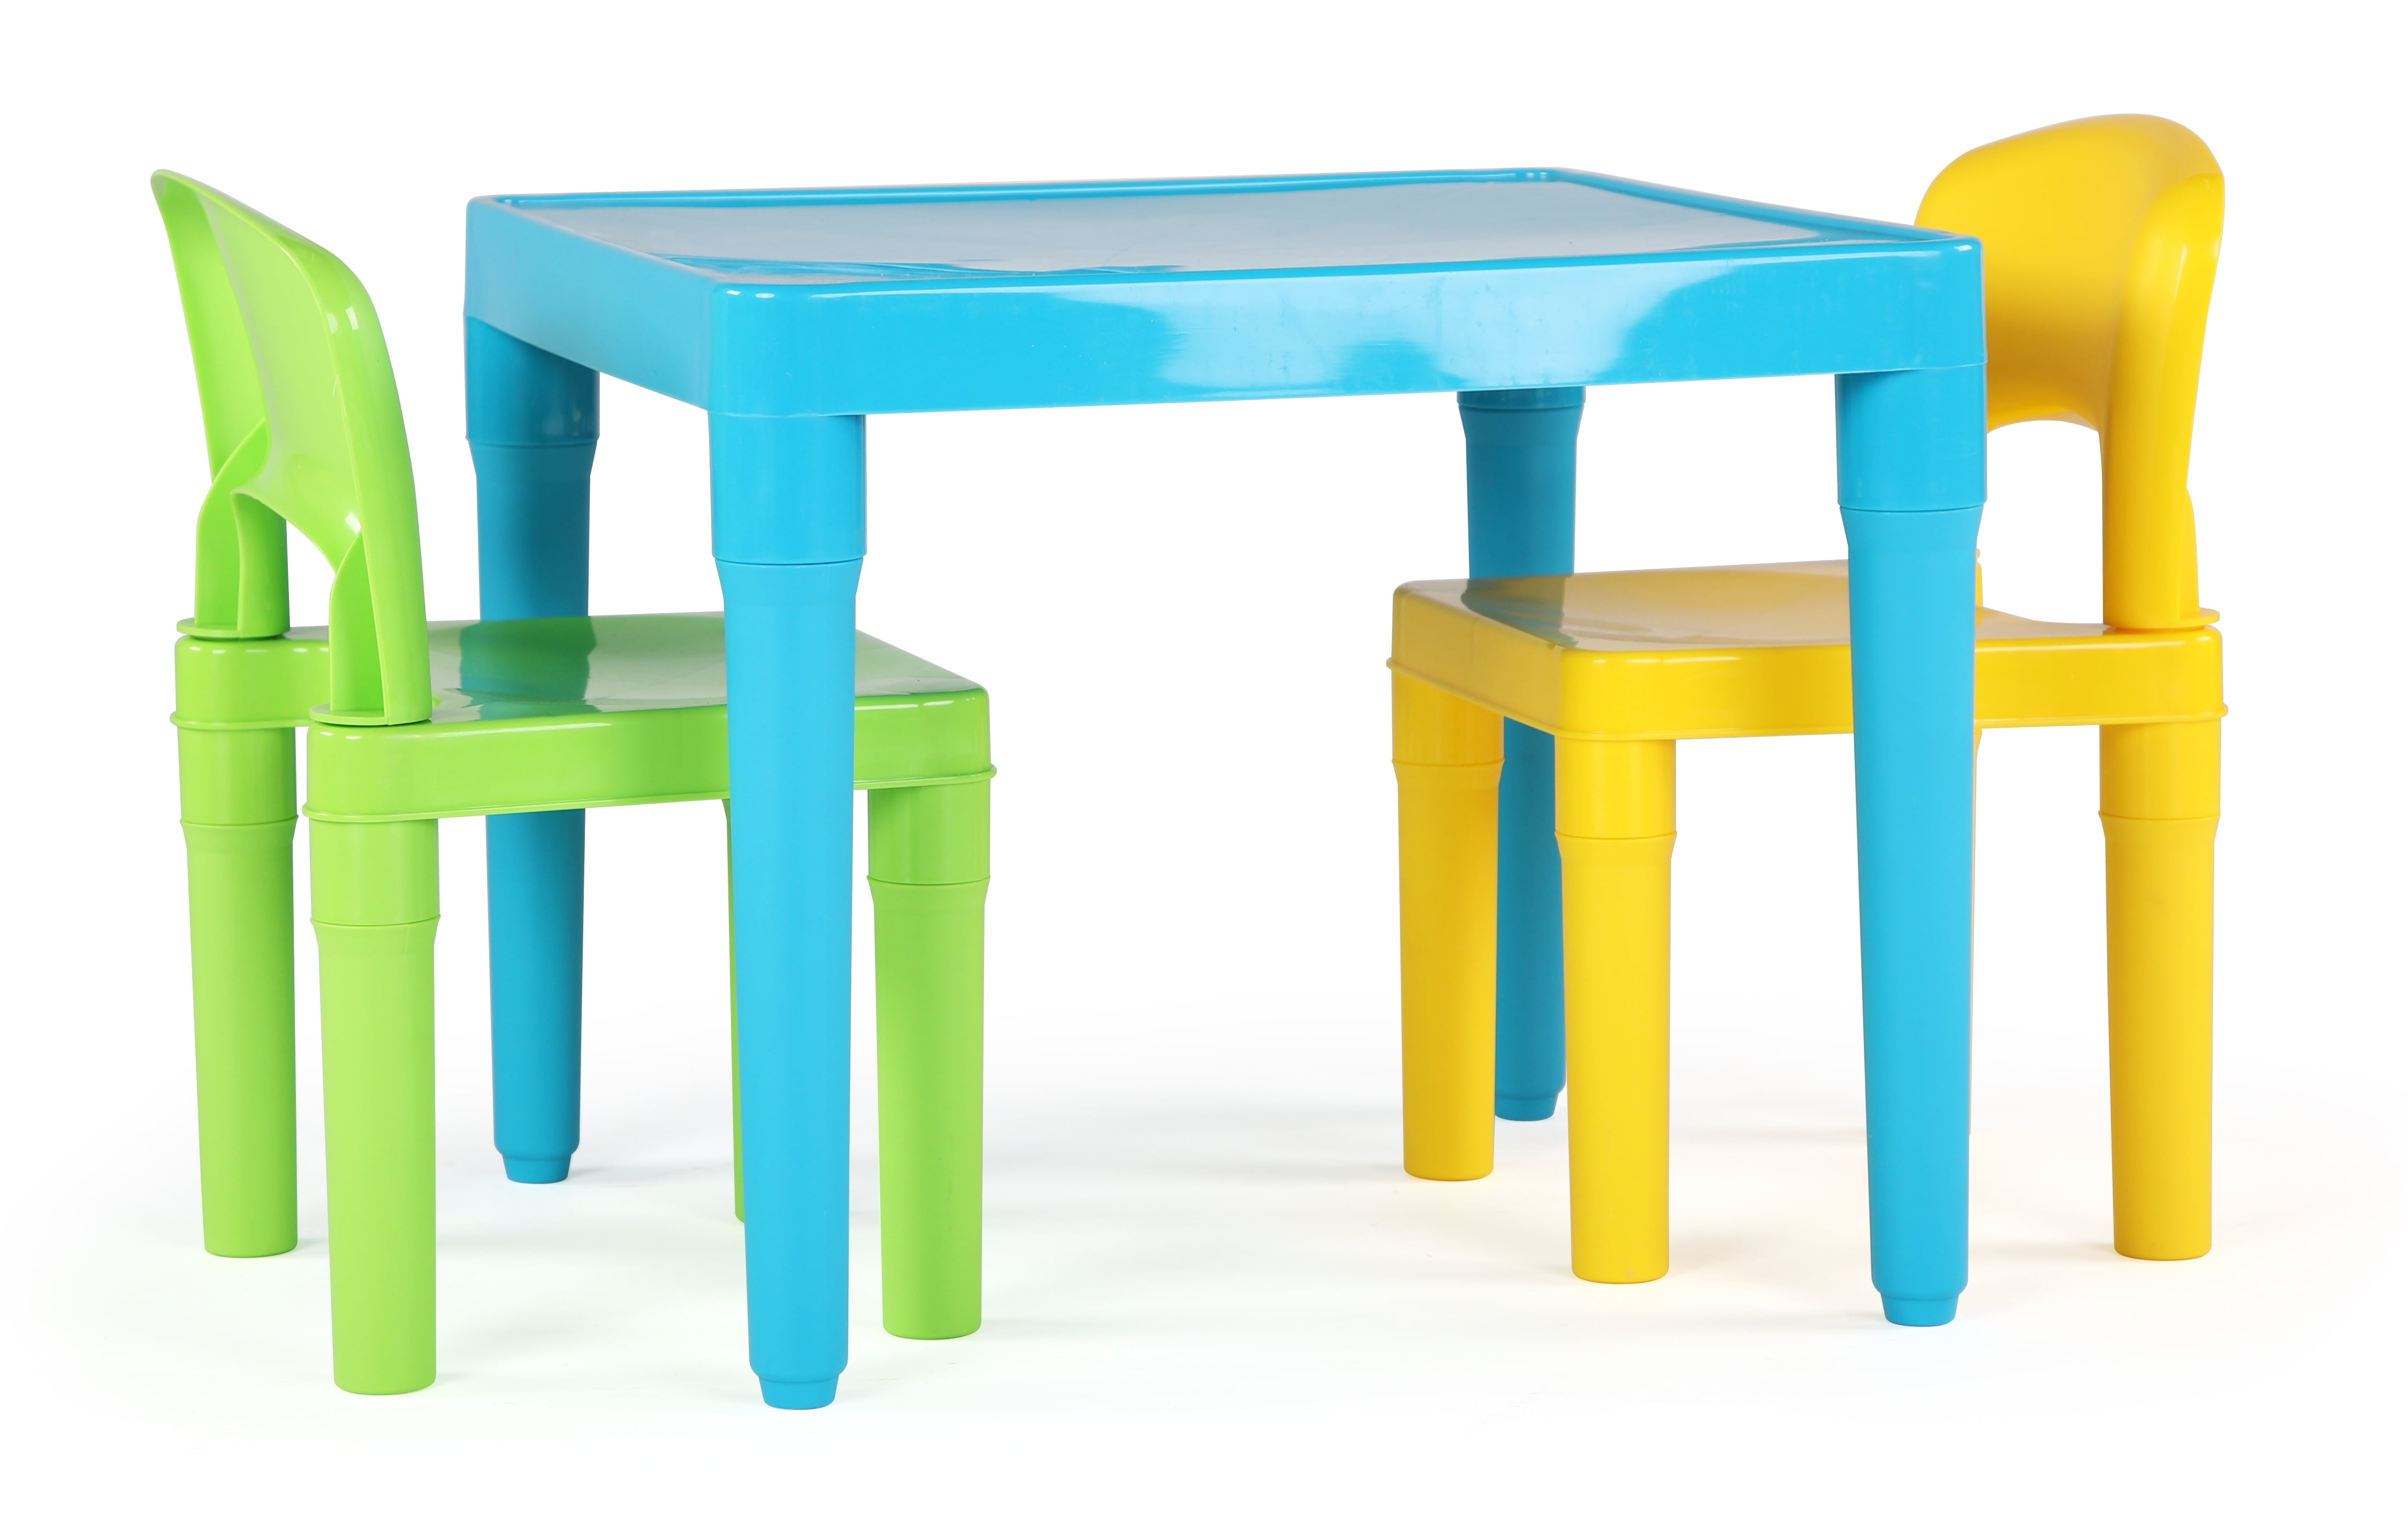 Red/Blue/Yellow Table Mate 4 Kids Original Plastic Folding Table and Chair Set 